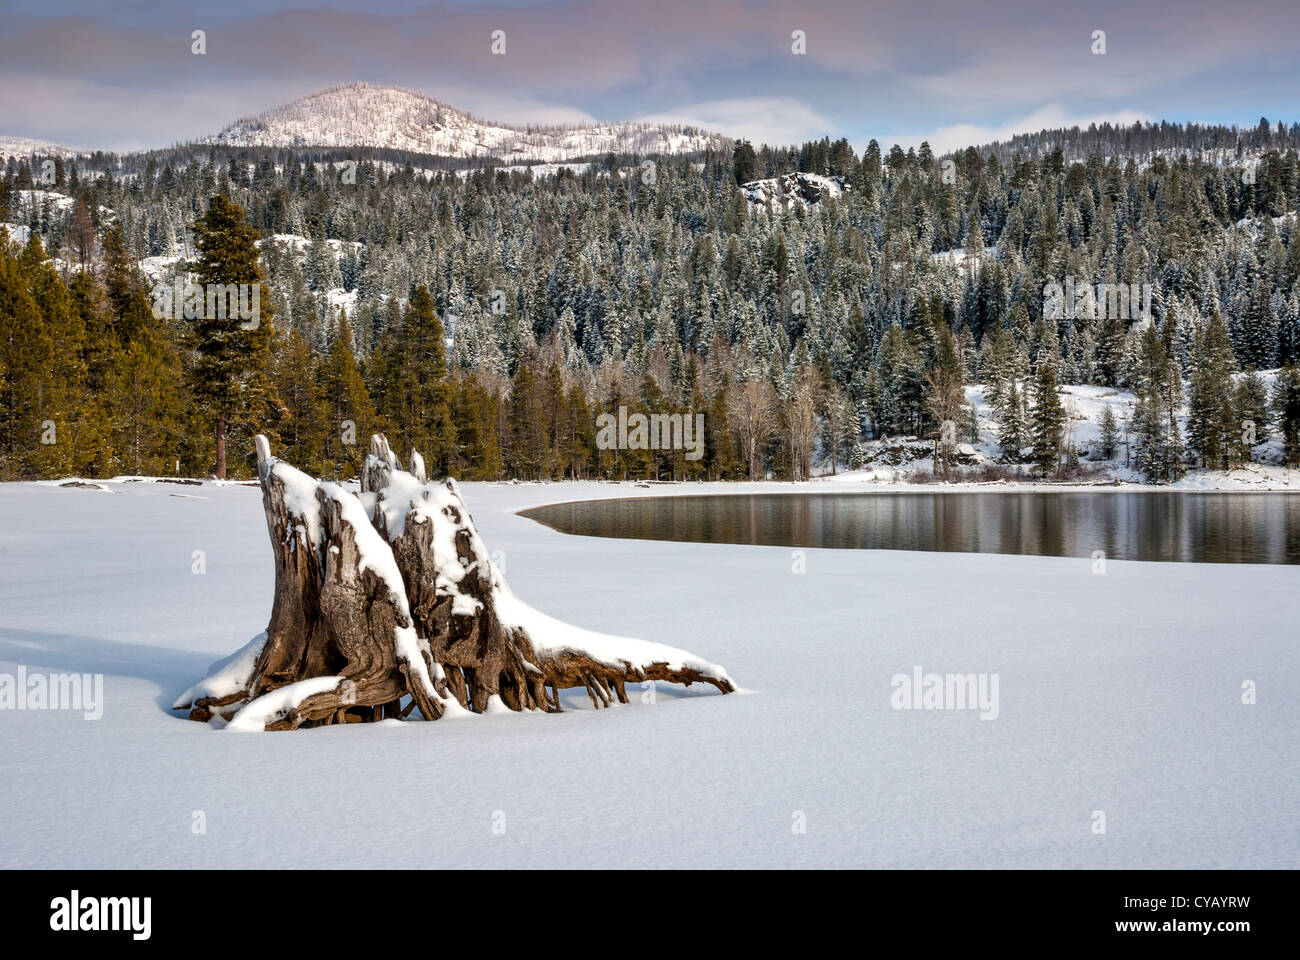 Winter snow blankets the banks of a lake Stock Photo